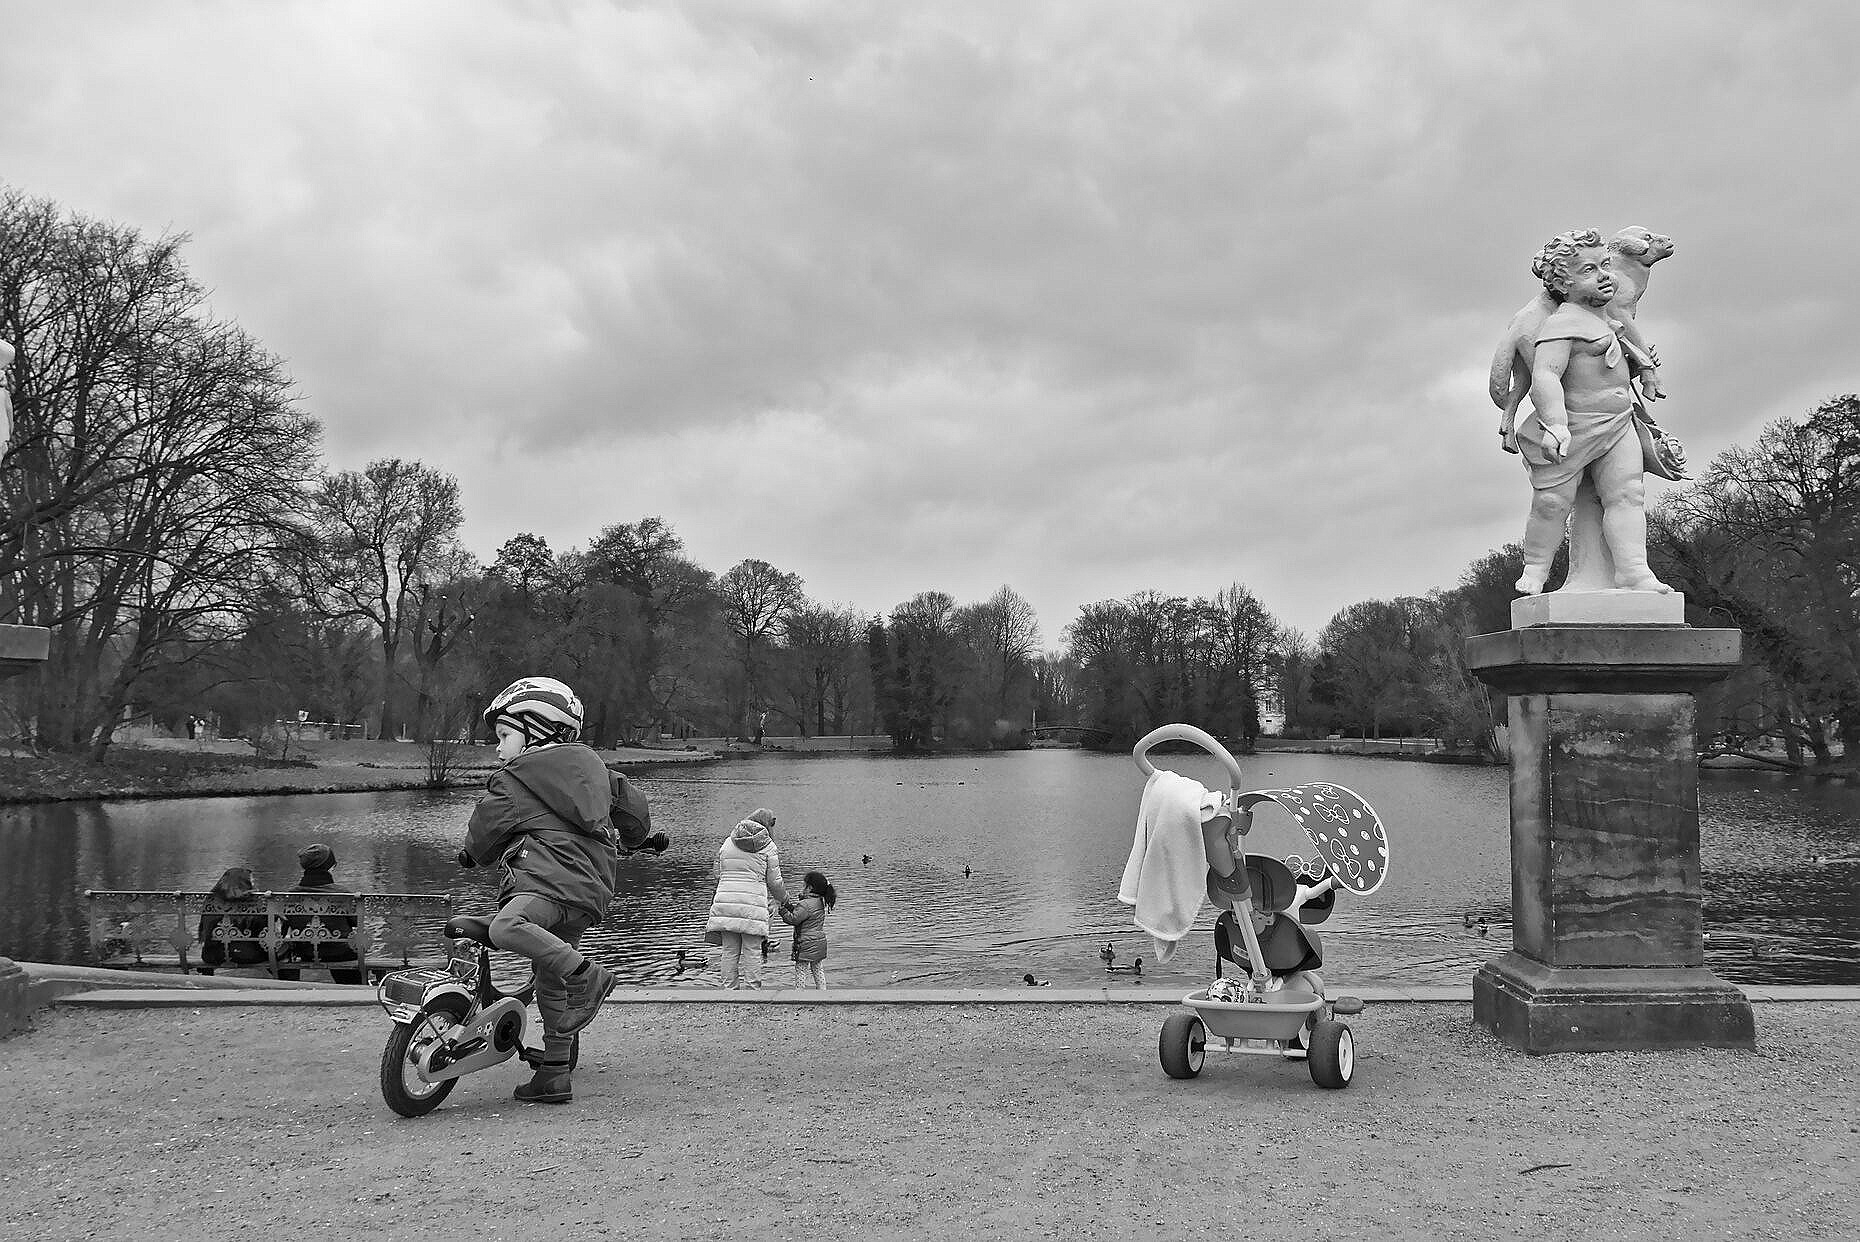 A young boy unmounting his bicycle in the garden of Schloss Charlottenburg